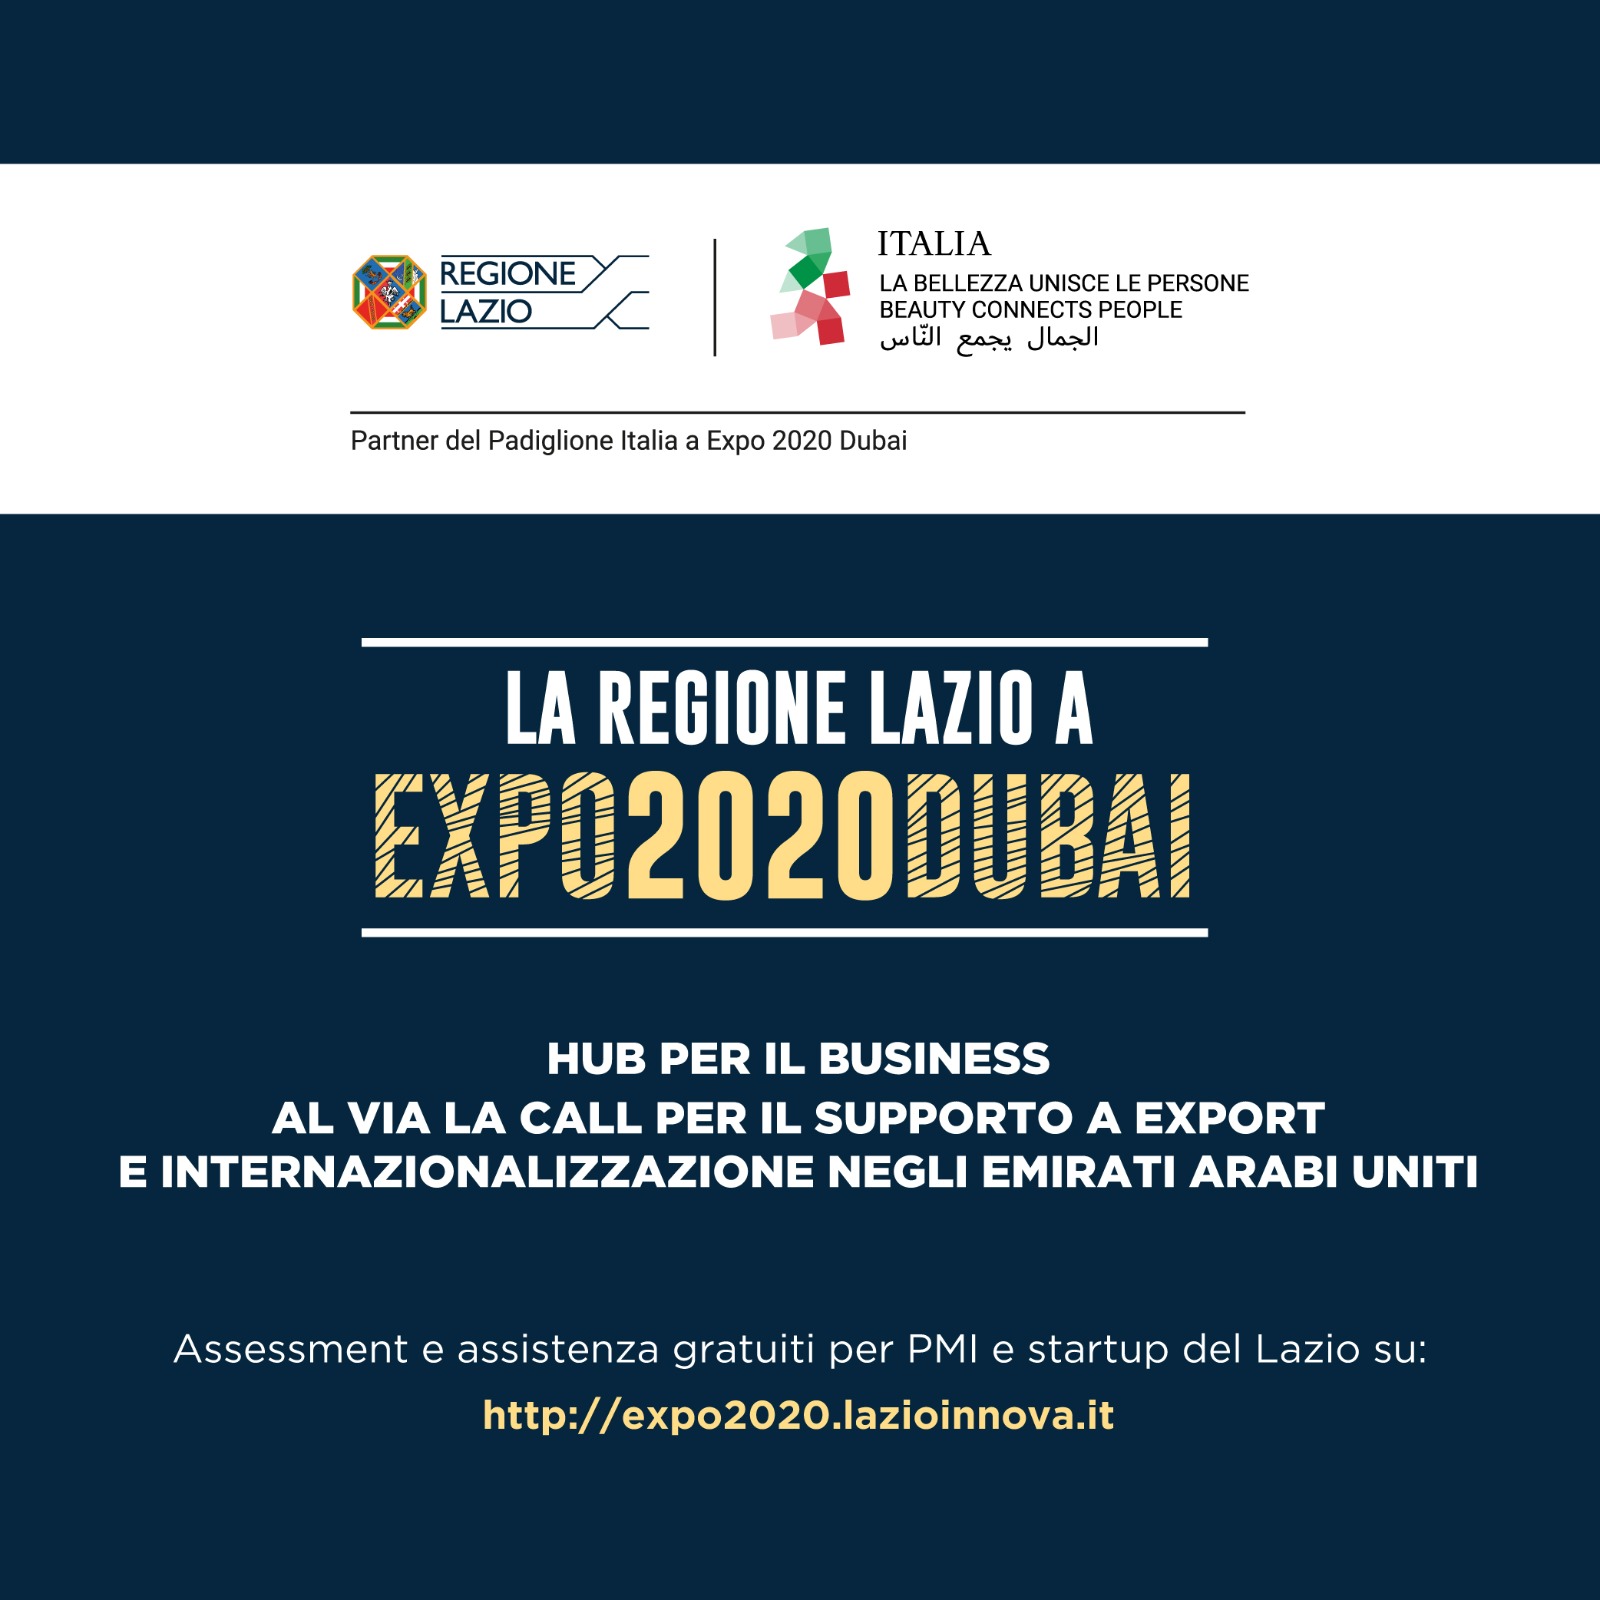 The Business HUB supporting Lazio SMEs is now operational